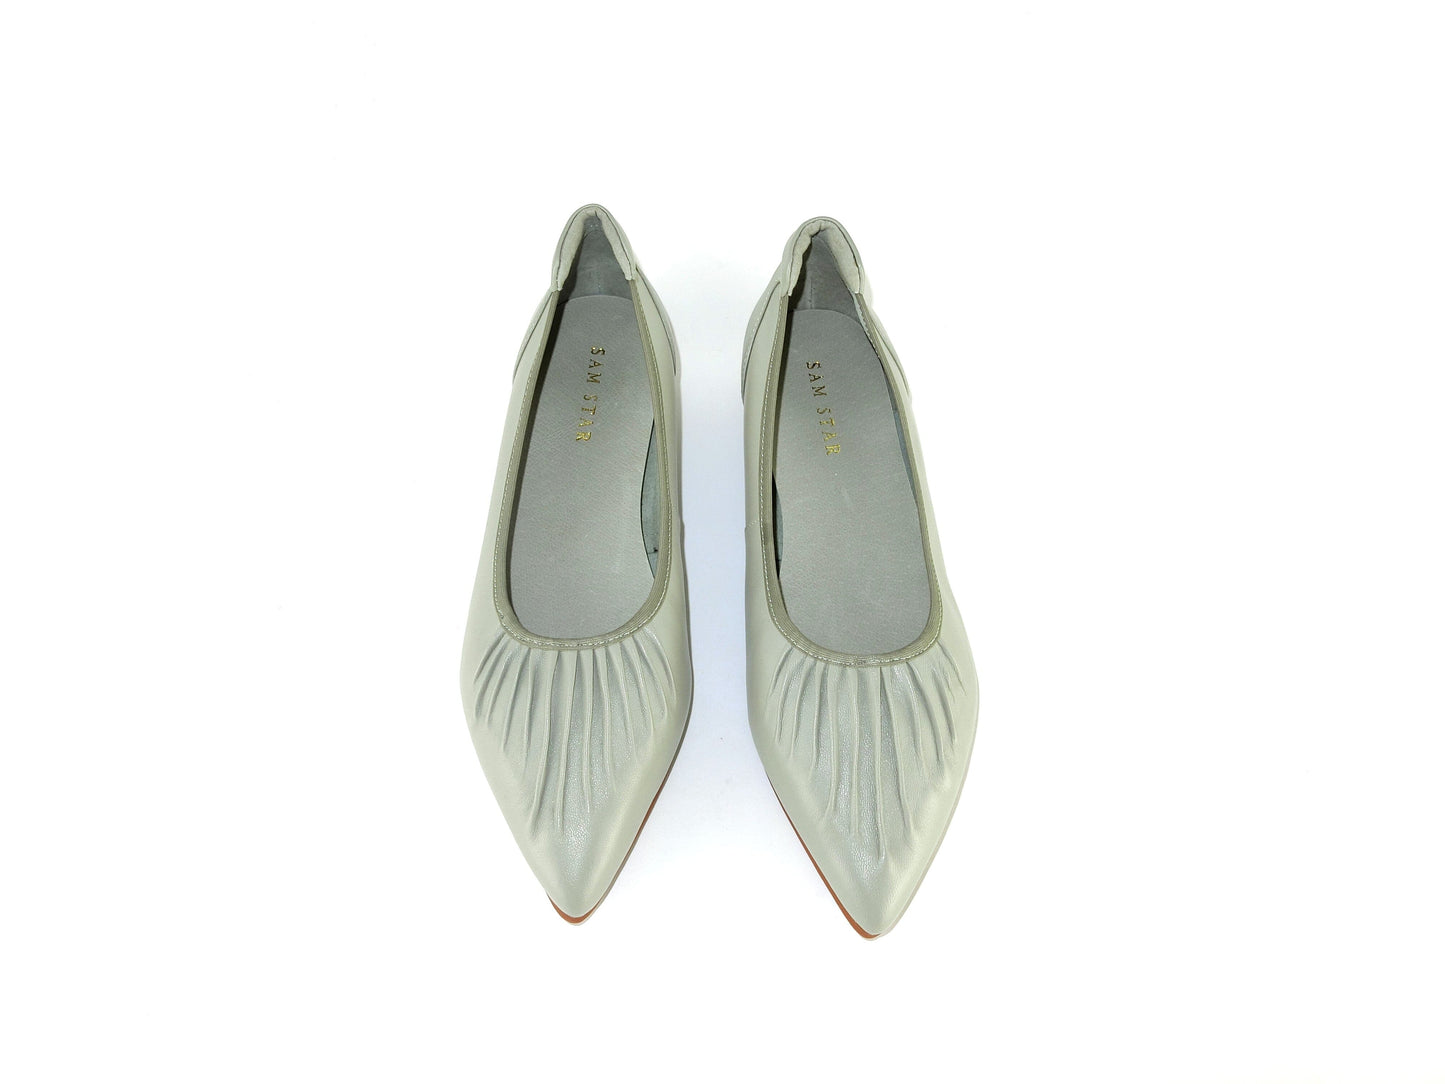 SS22006 Pointy Leather pumps with gathering details with extra cushion Pumps Sam Star Shoes 